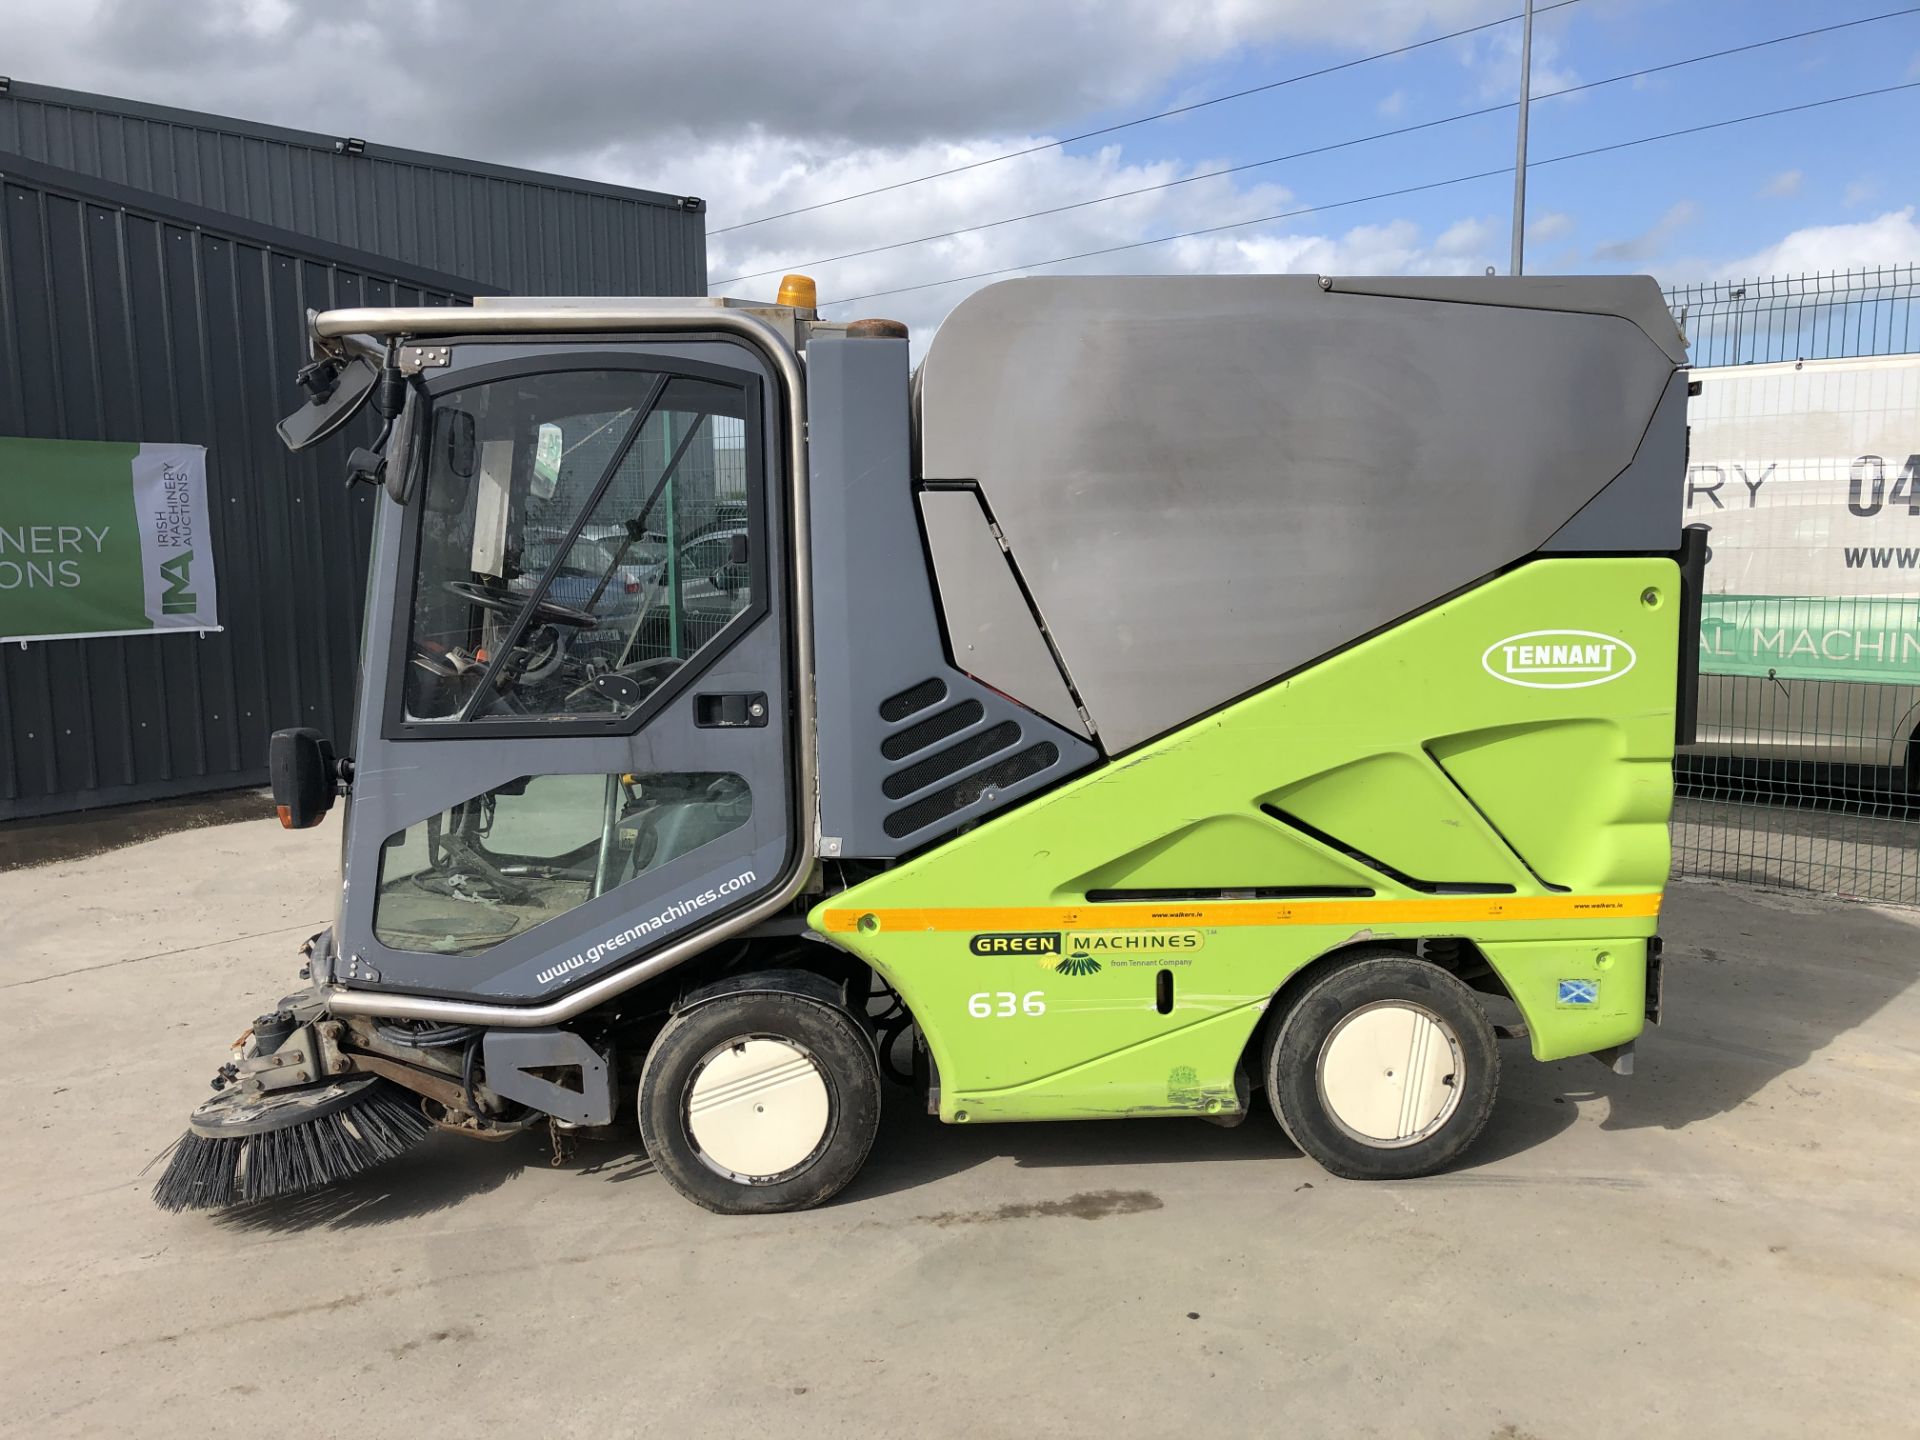 11D53843 2011 Green Machine 626 Compact Street Sweeper - Image 2 of 4